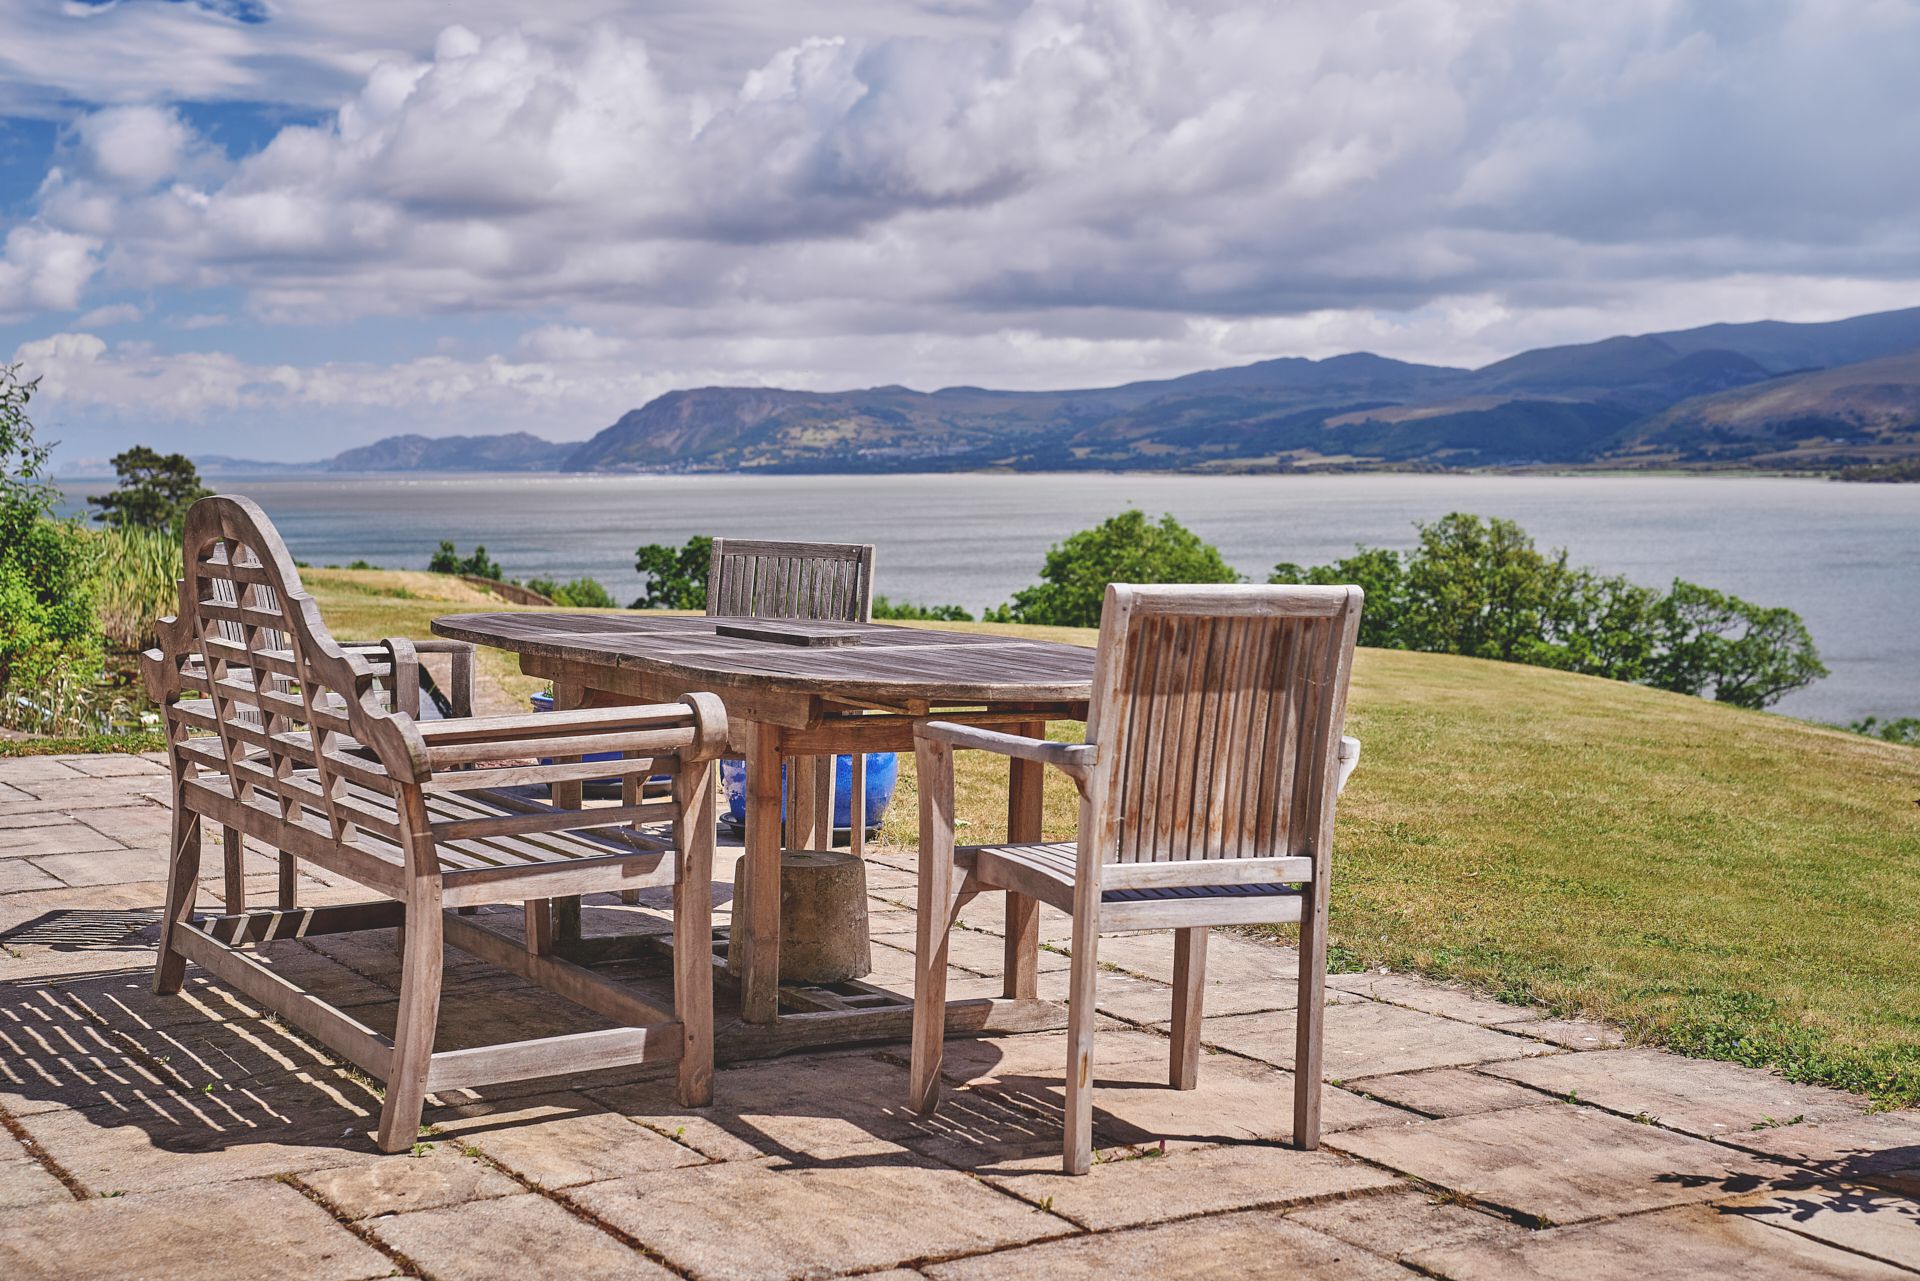 The outdoor dining table at Menai View, Anglesey